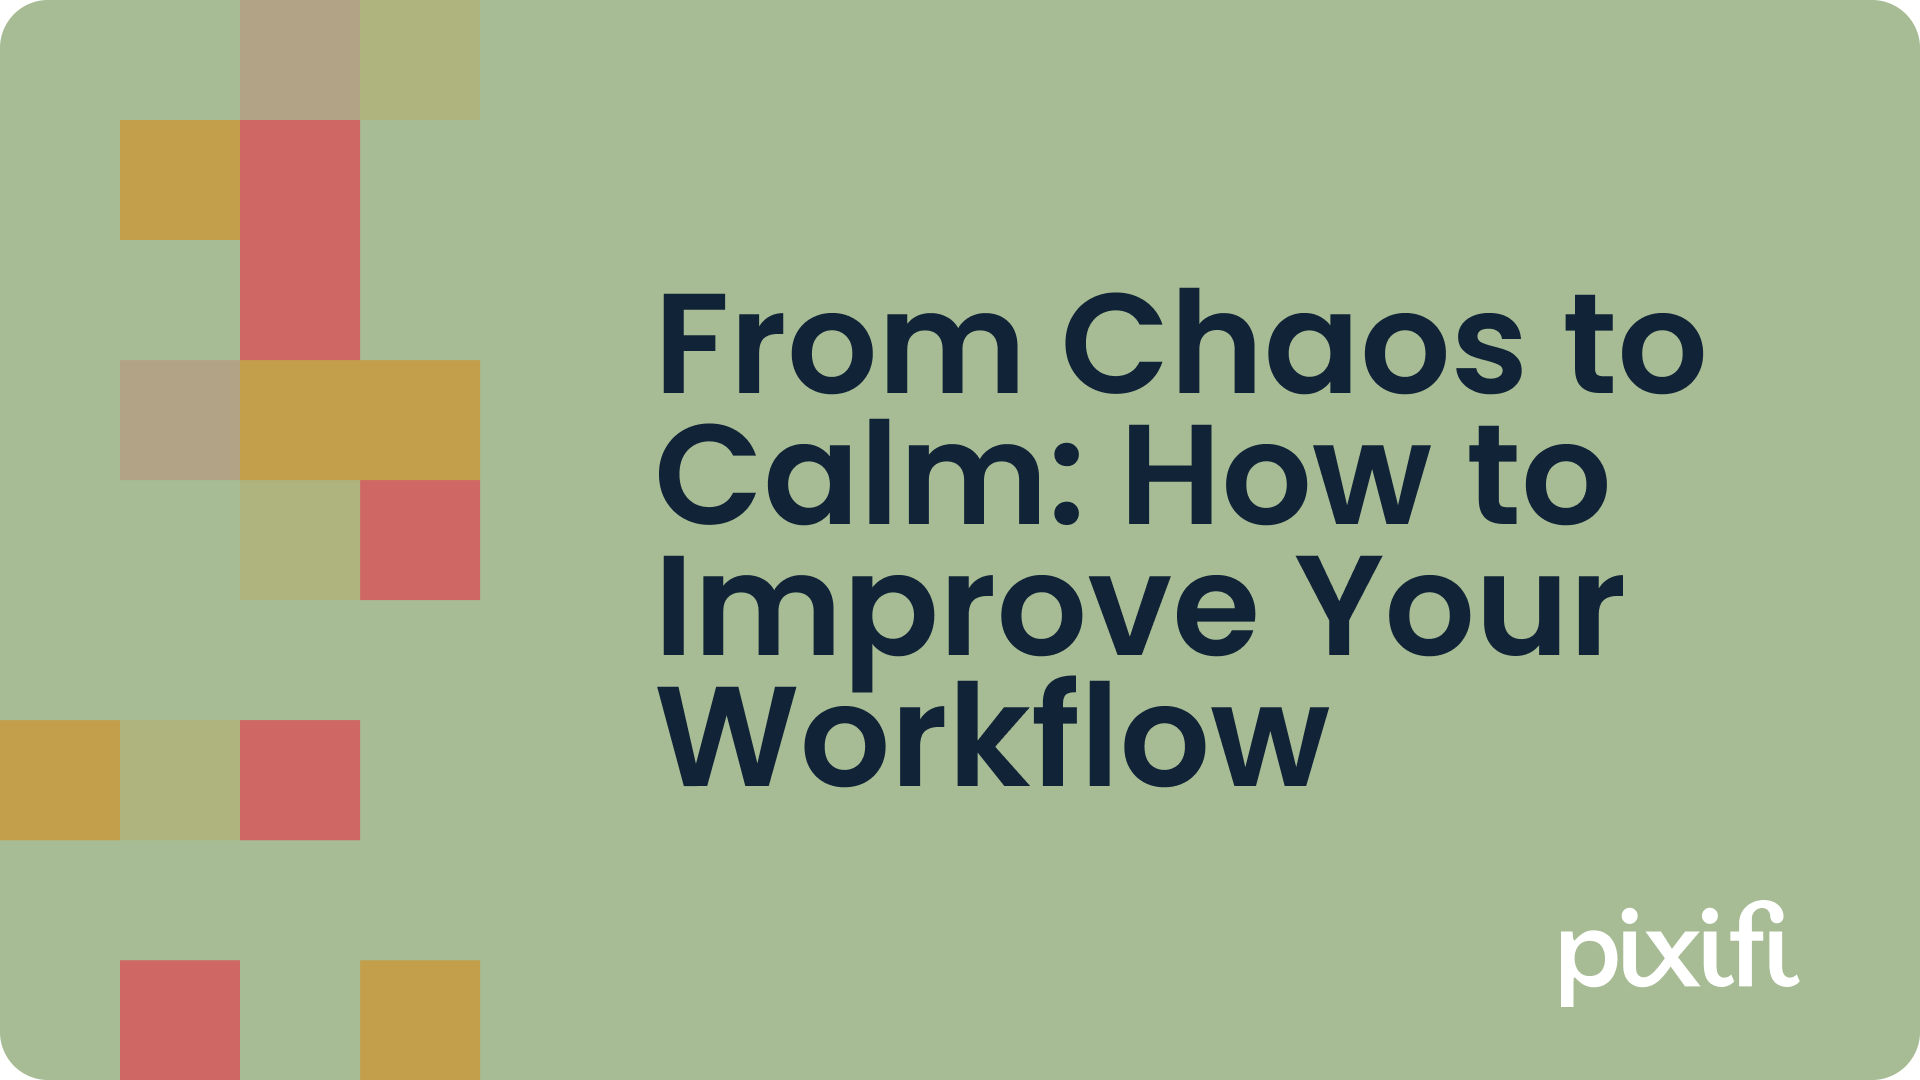 From Chaos to Calm: How to Improve Your Workflow